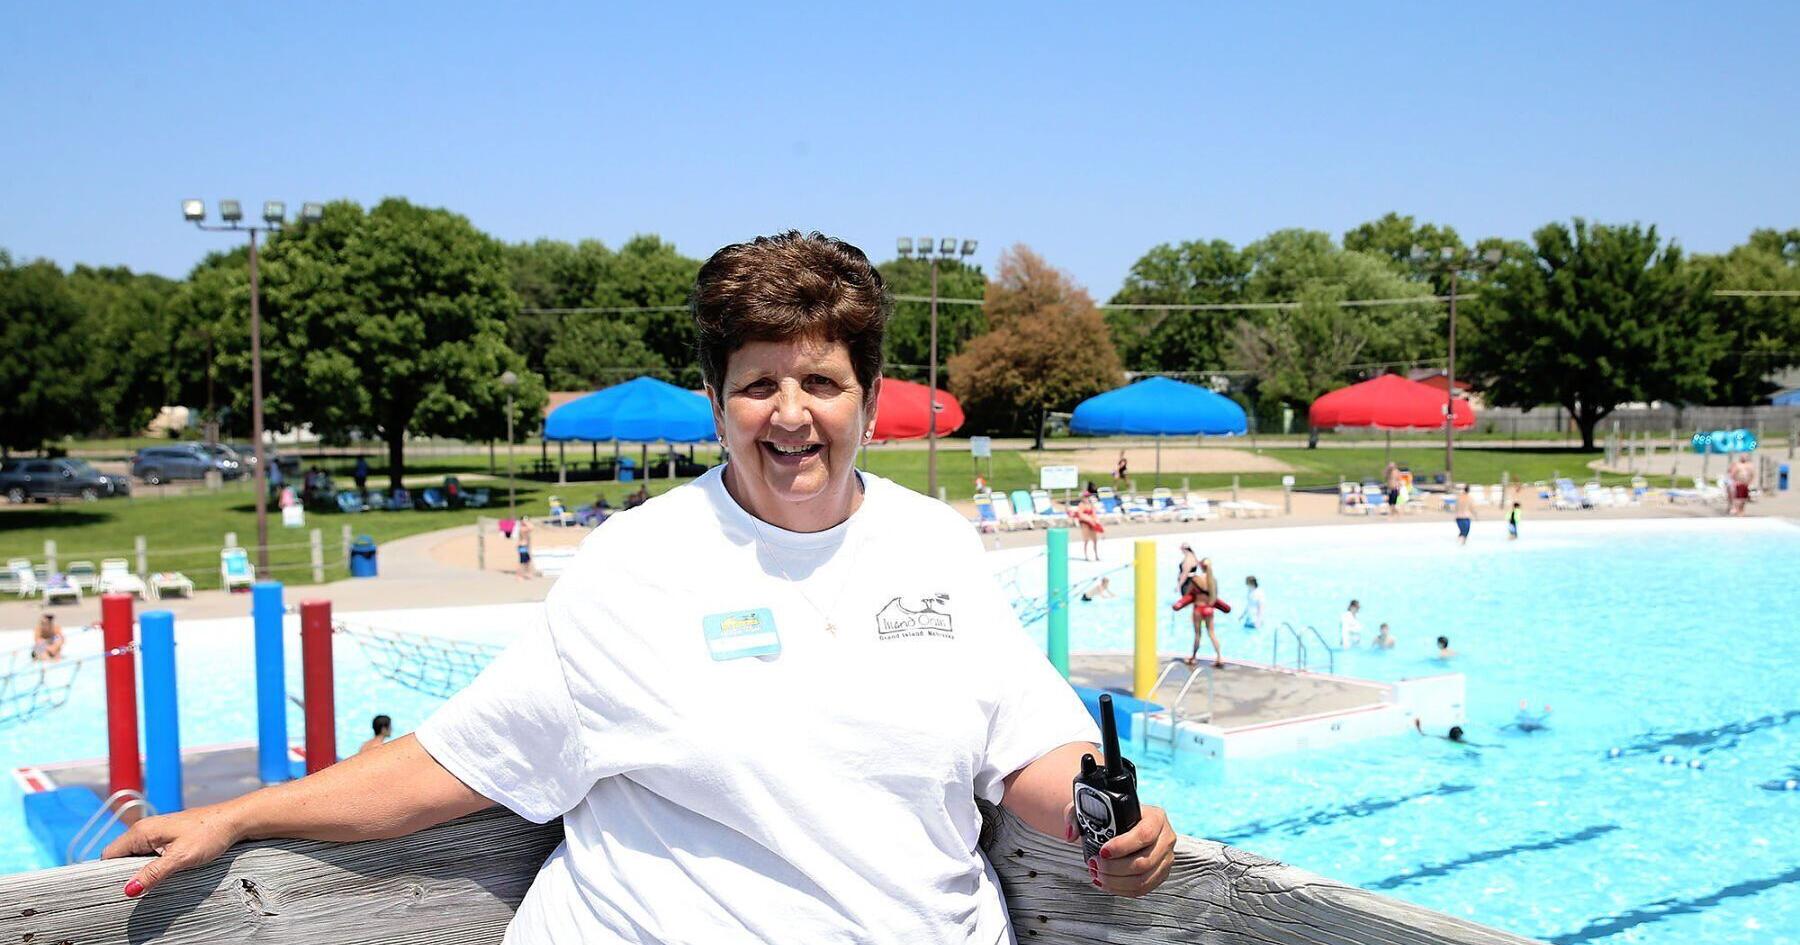 Oasis manager, who went from ‘pool rat’ to ‘Waterpark Queen,’ recalls life spent at the pool